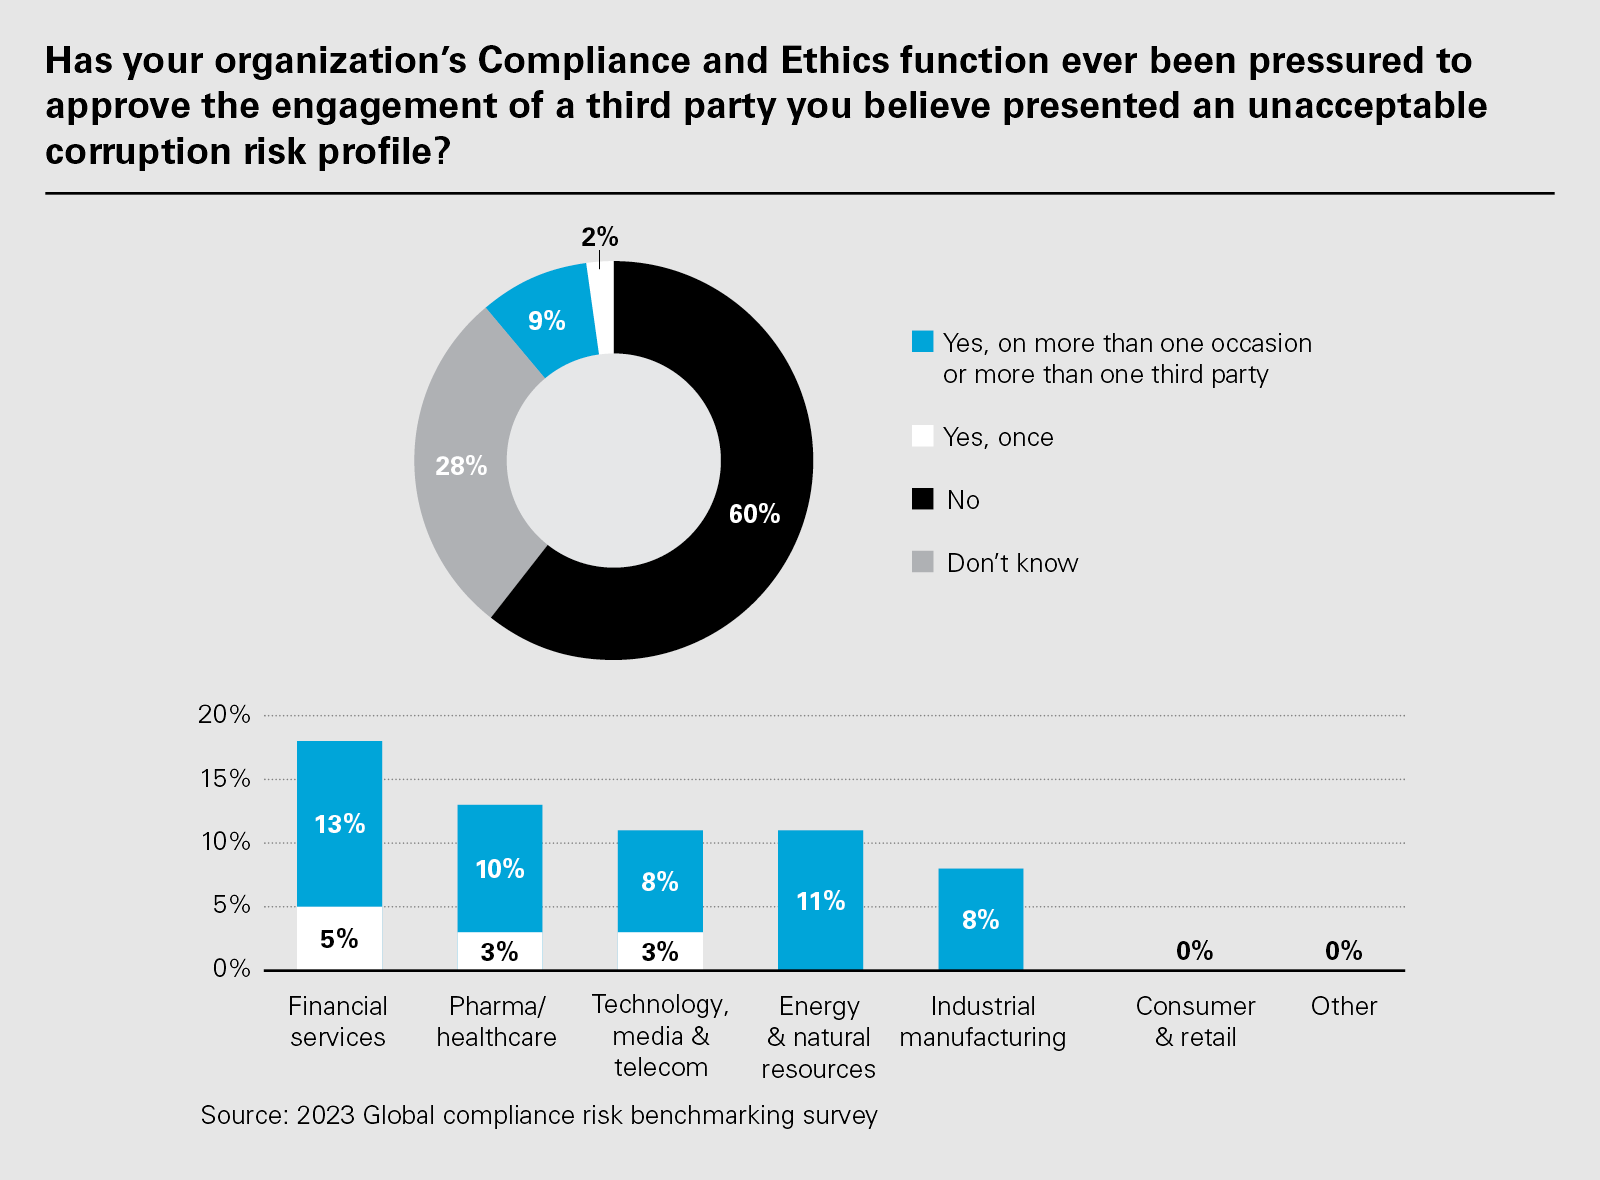 Has your organization‘s Compliance and Ethics function ever been pressured to approve the engagement of a third party you believe presented an unacceptable corruption risk profile?